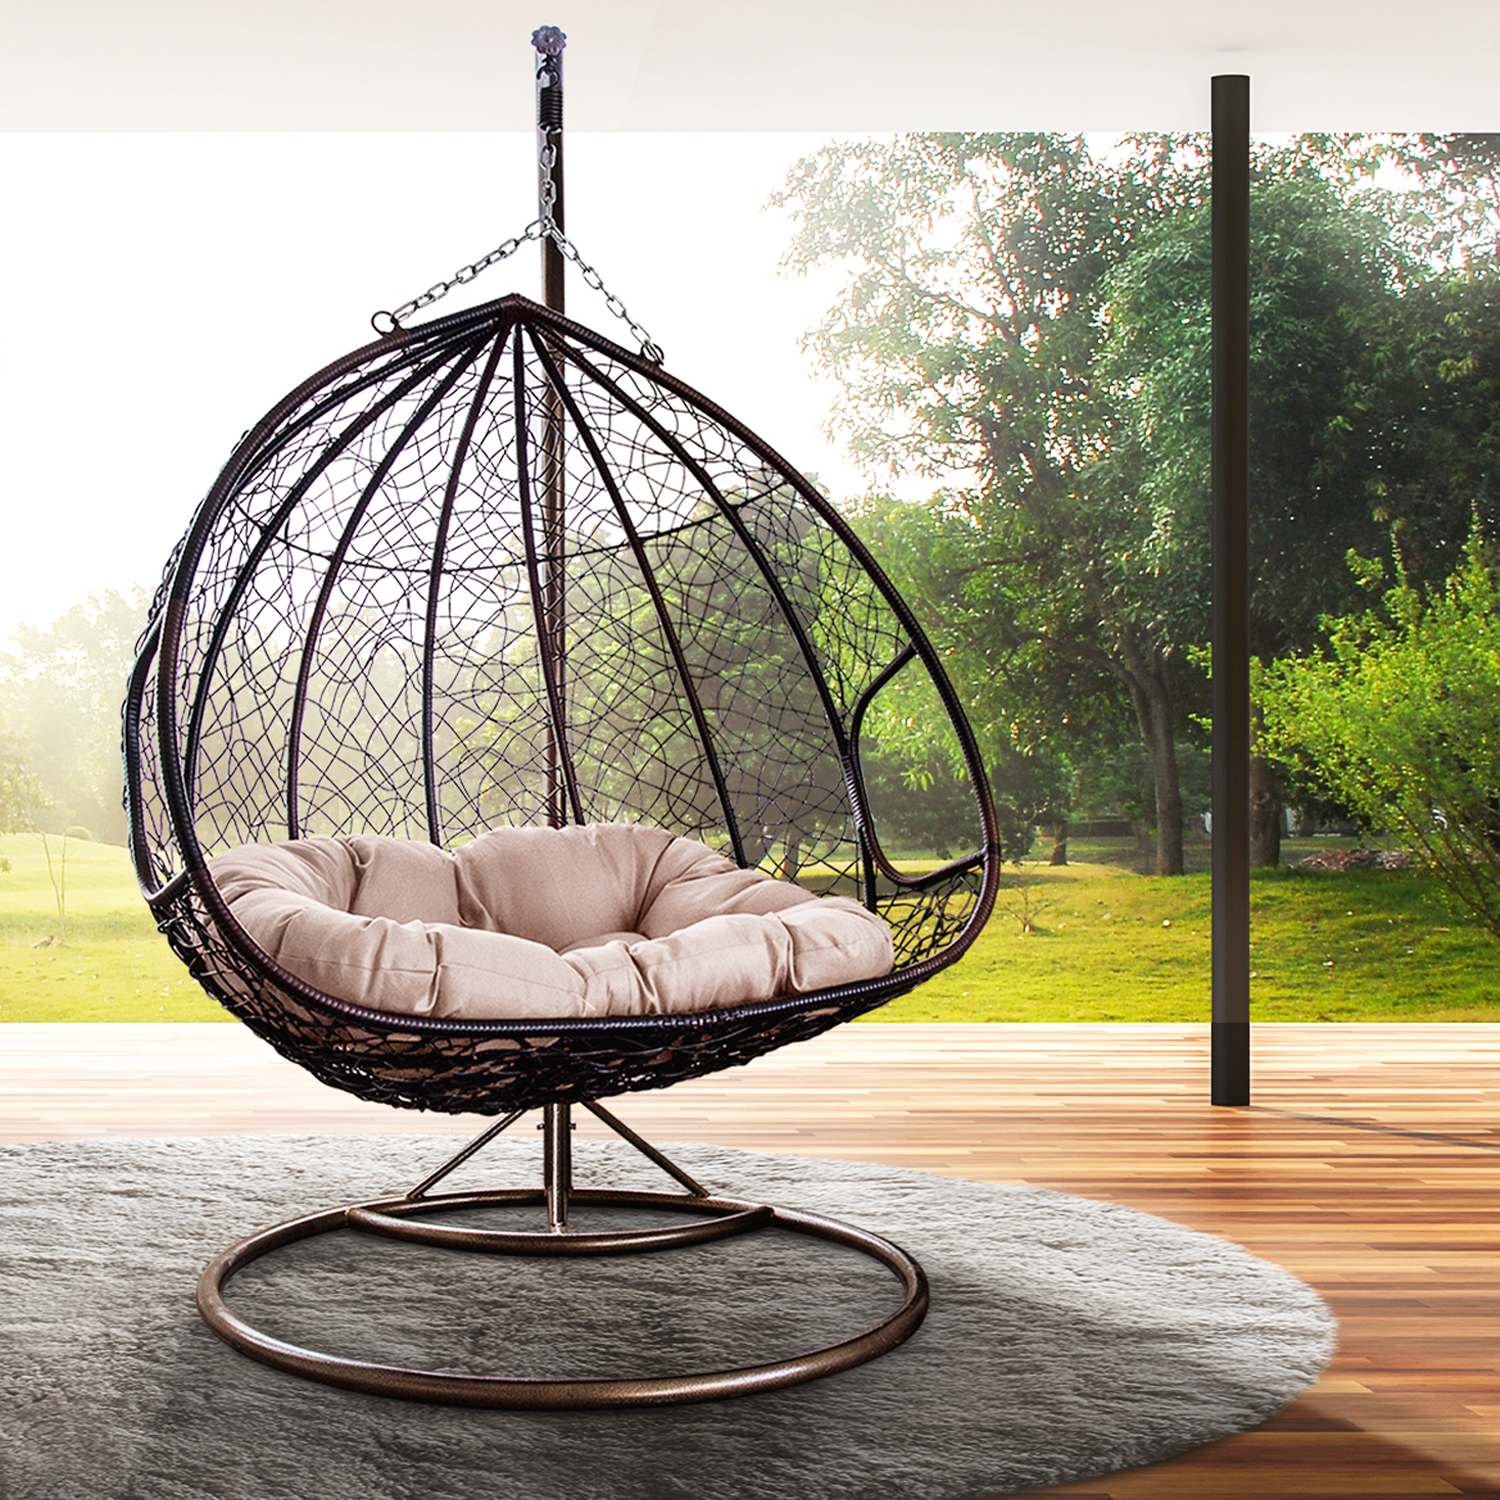 Outdoor Wicker Swing Chair - Double Seats with Rack Handle, Red Cushion Mat & Support Frame - image 2 of 7